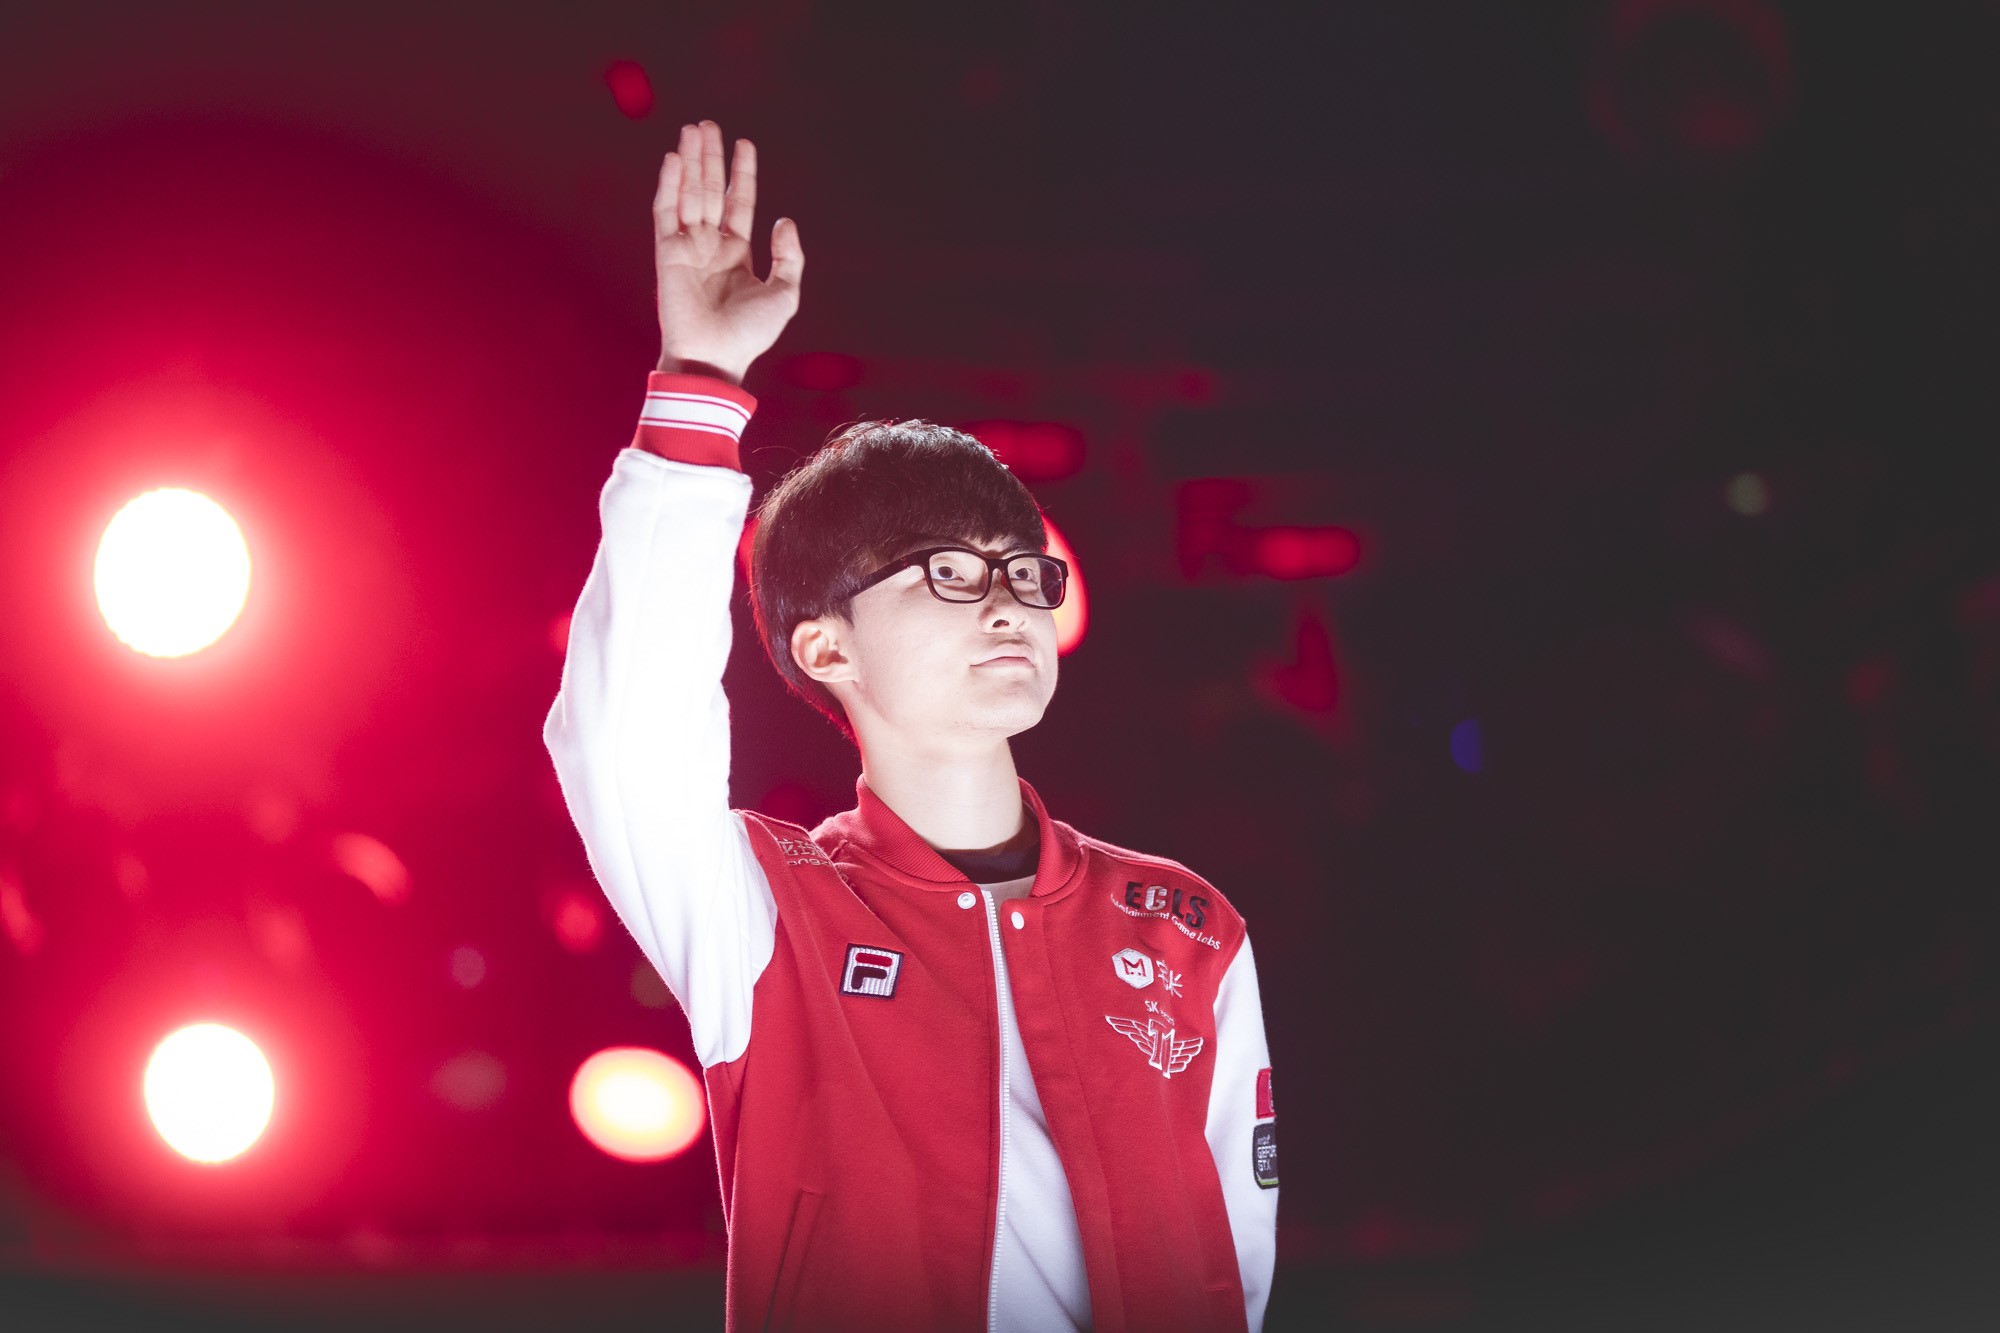 South Korea’s Lee “Faker” Sang-hyeok is an e-sports star but the sport lacks a David Beckham or a Stepehn Curry to take it to the mainstream. Photo: Handout